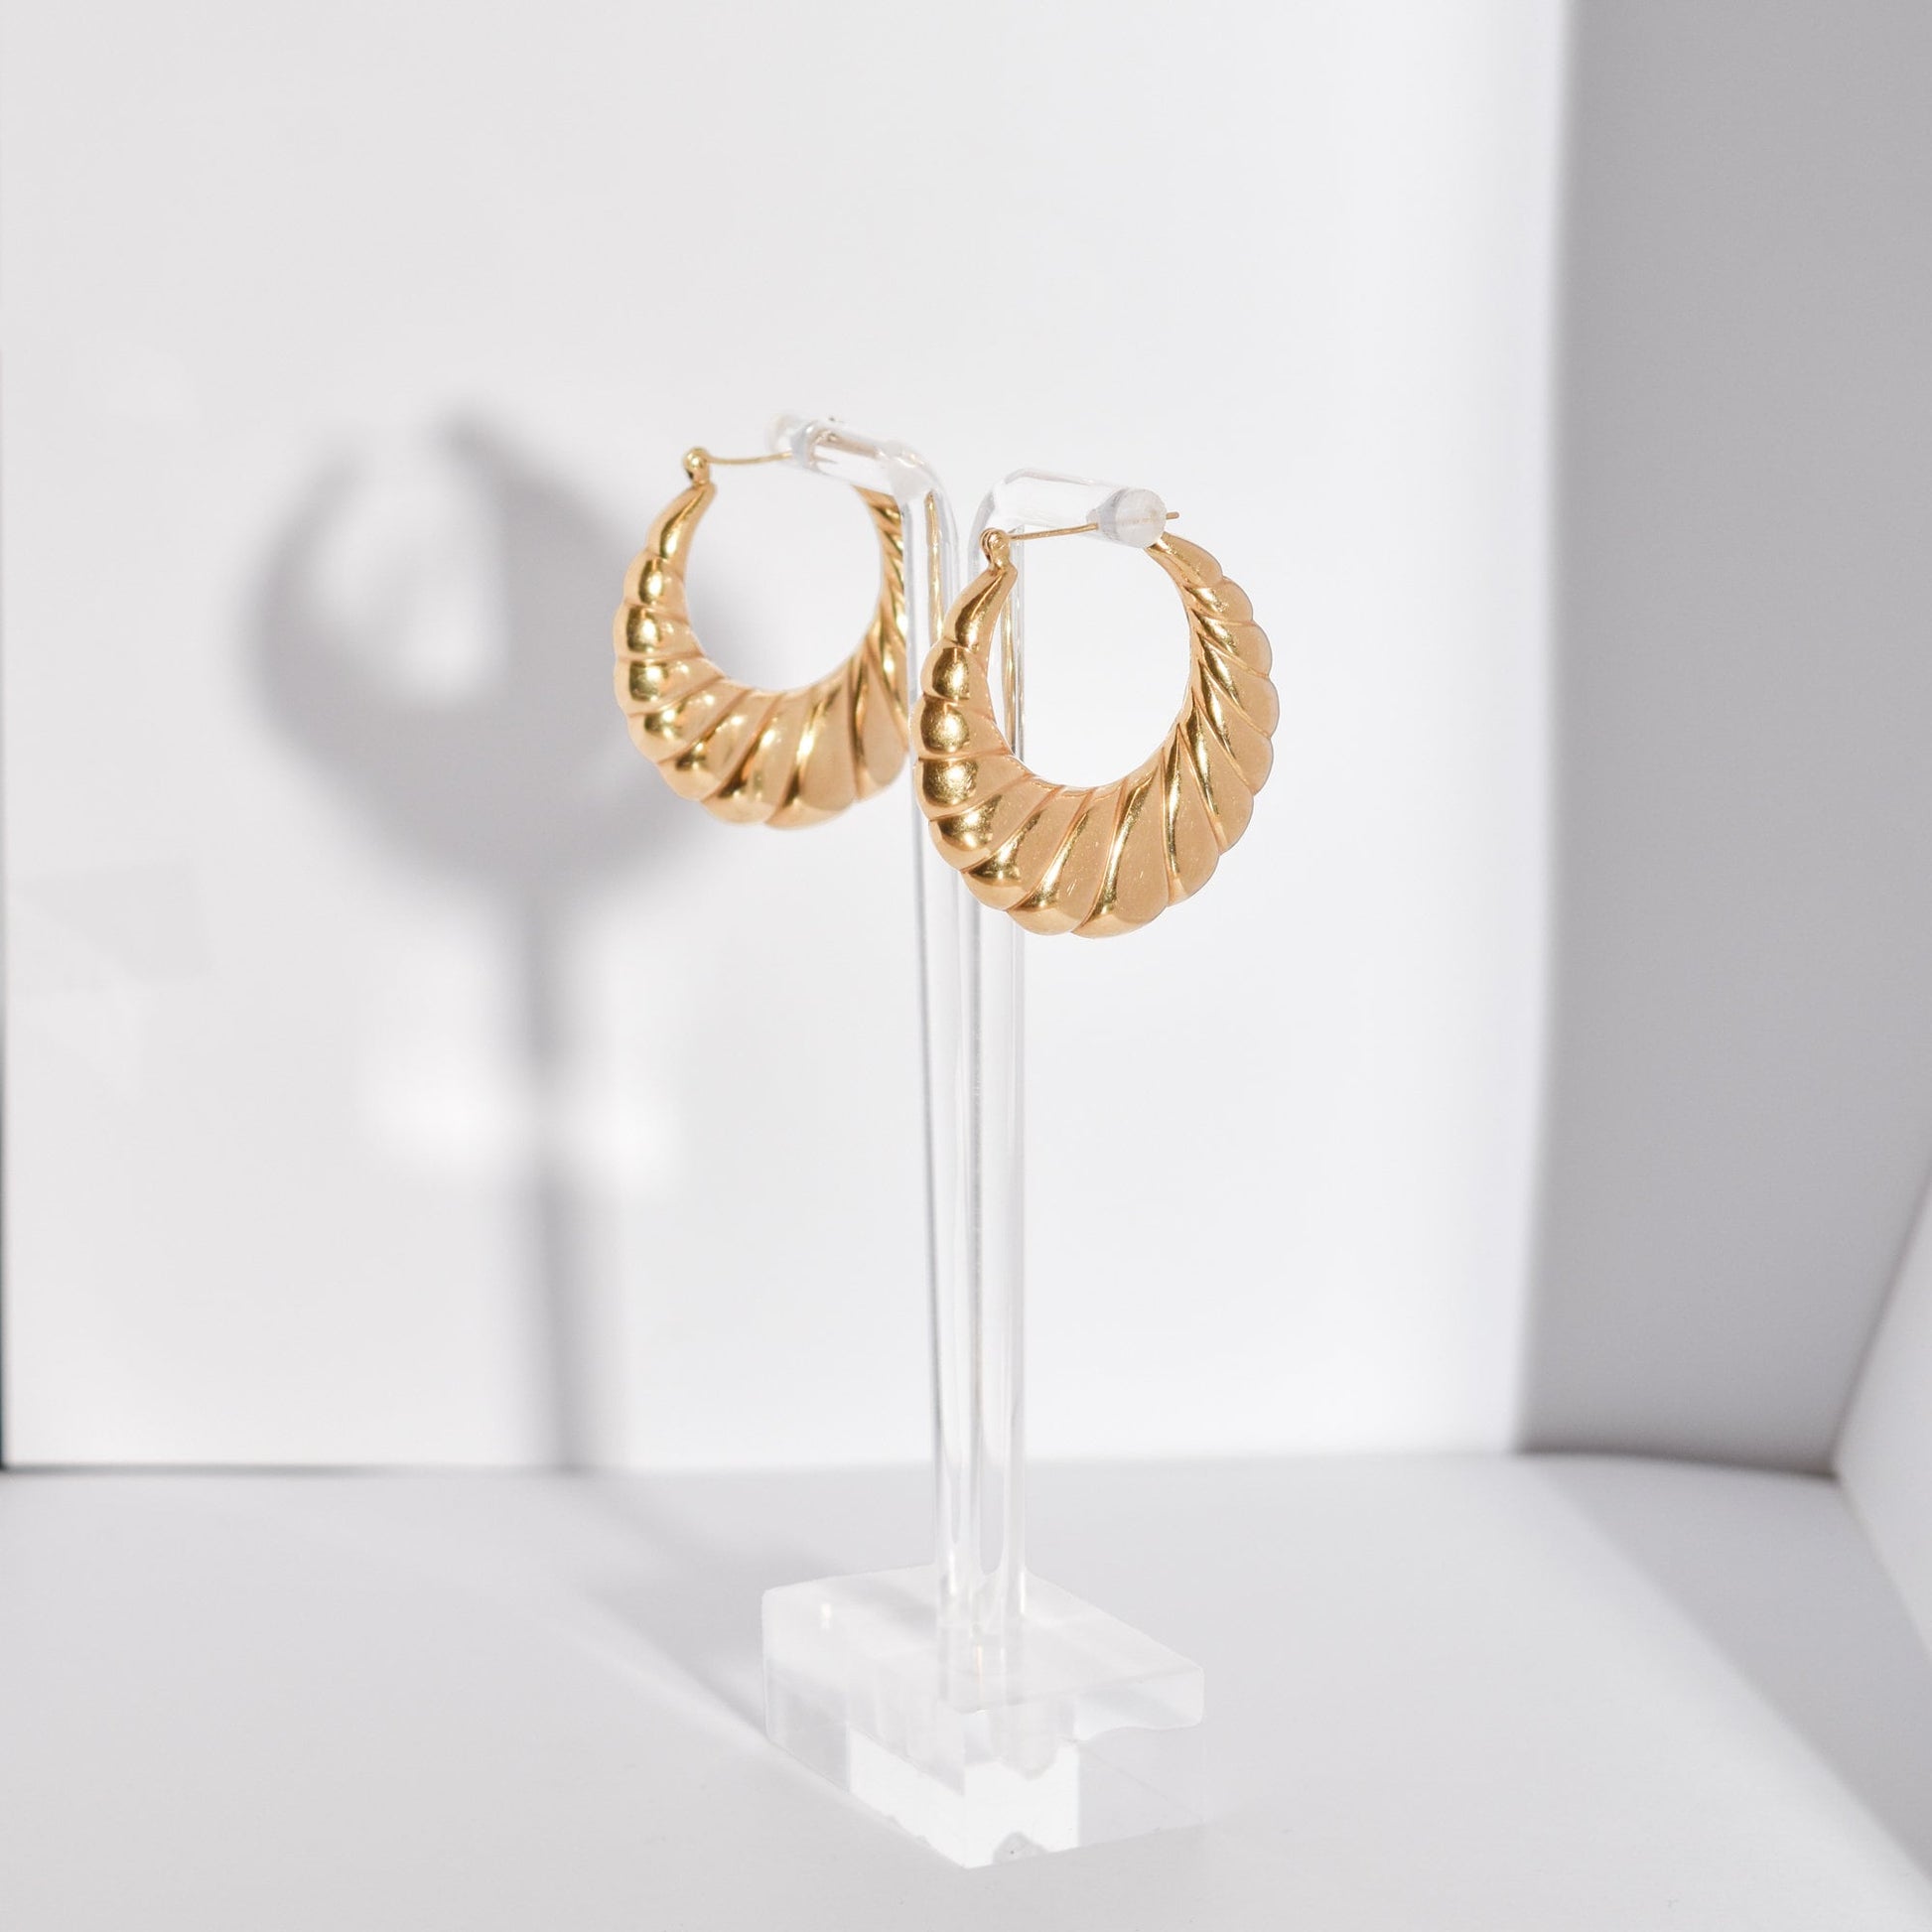 MCM 14K yellow gold puffed scallop hoop earrings, medium-sized 36mm estate jewelry on display stand.